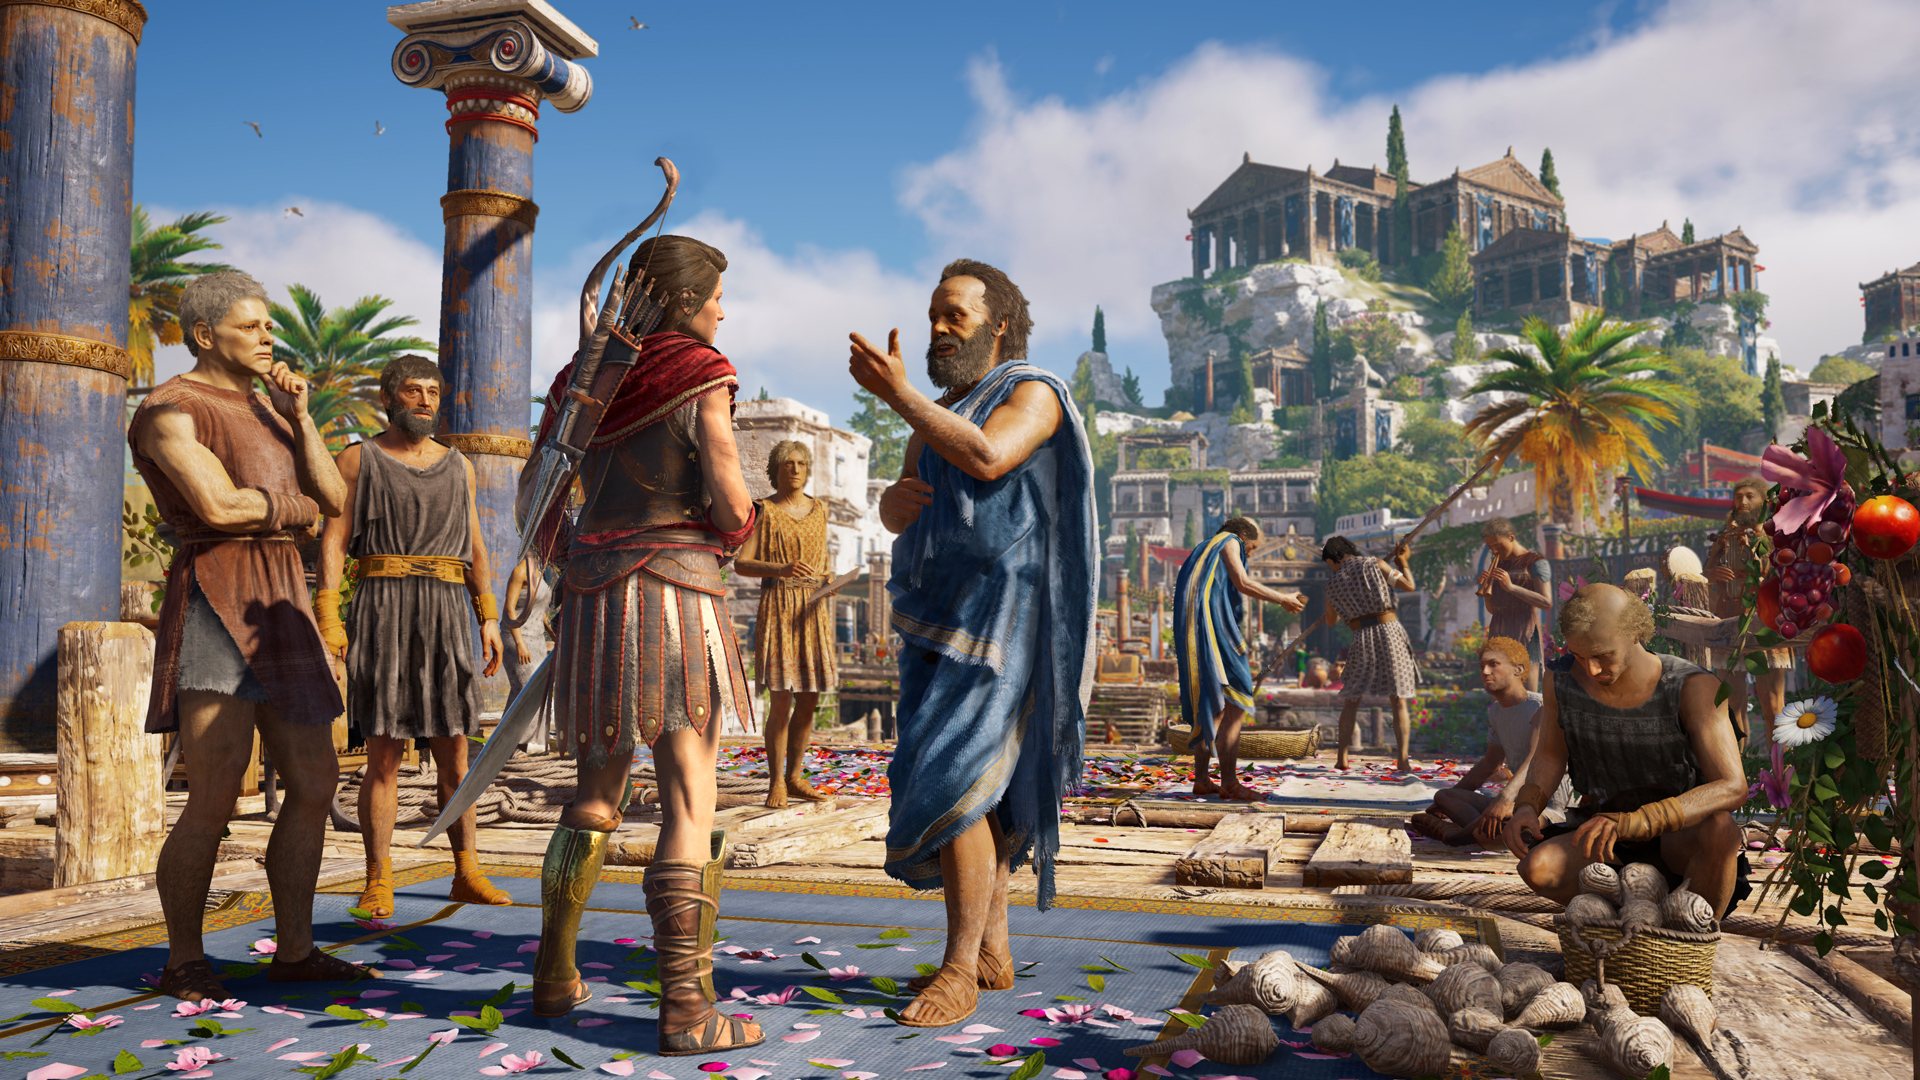 Assassin's Creed Odyssey Ultimate Edition Steam Account